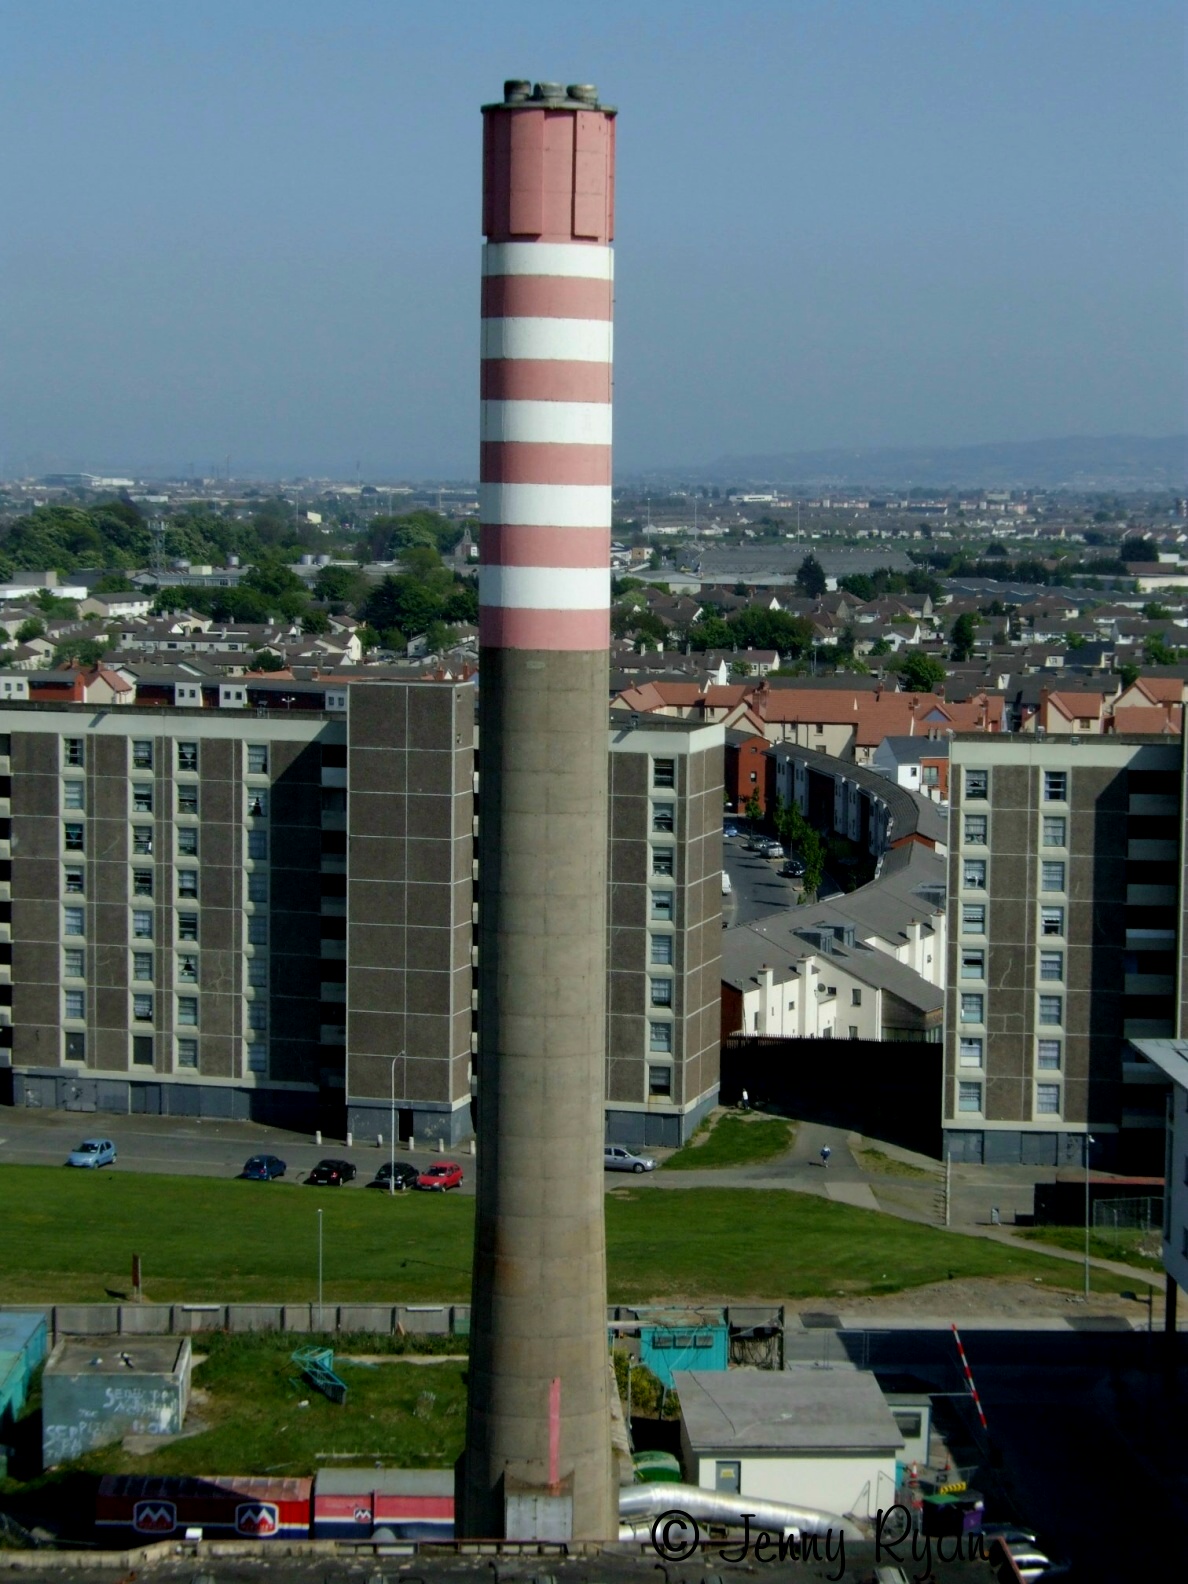 The iconic tower of the Ballymun Boiler House.